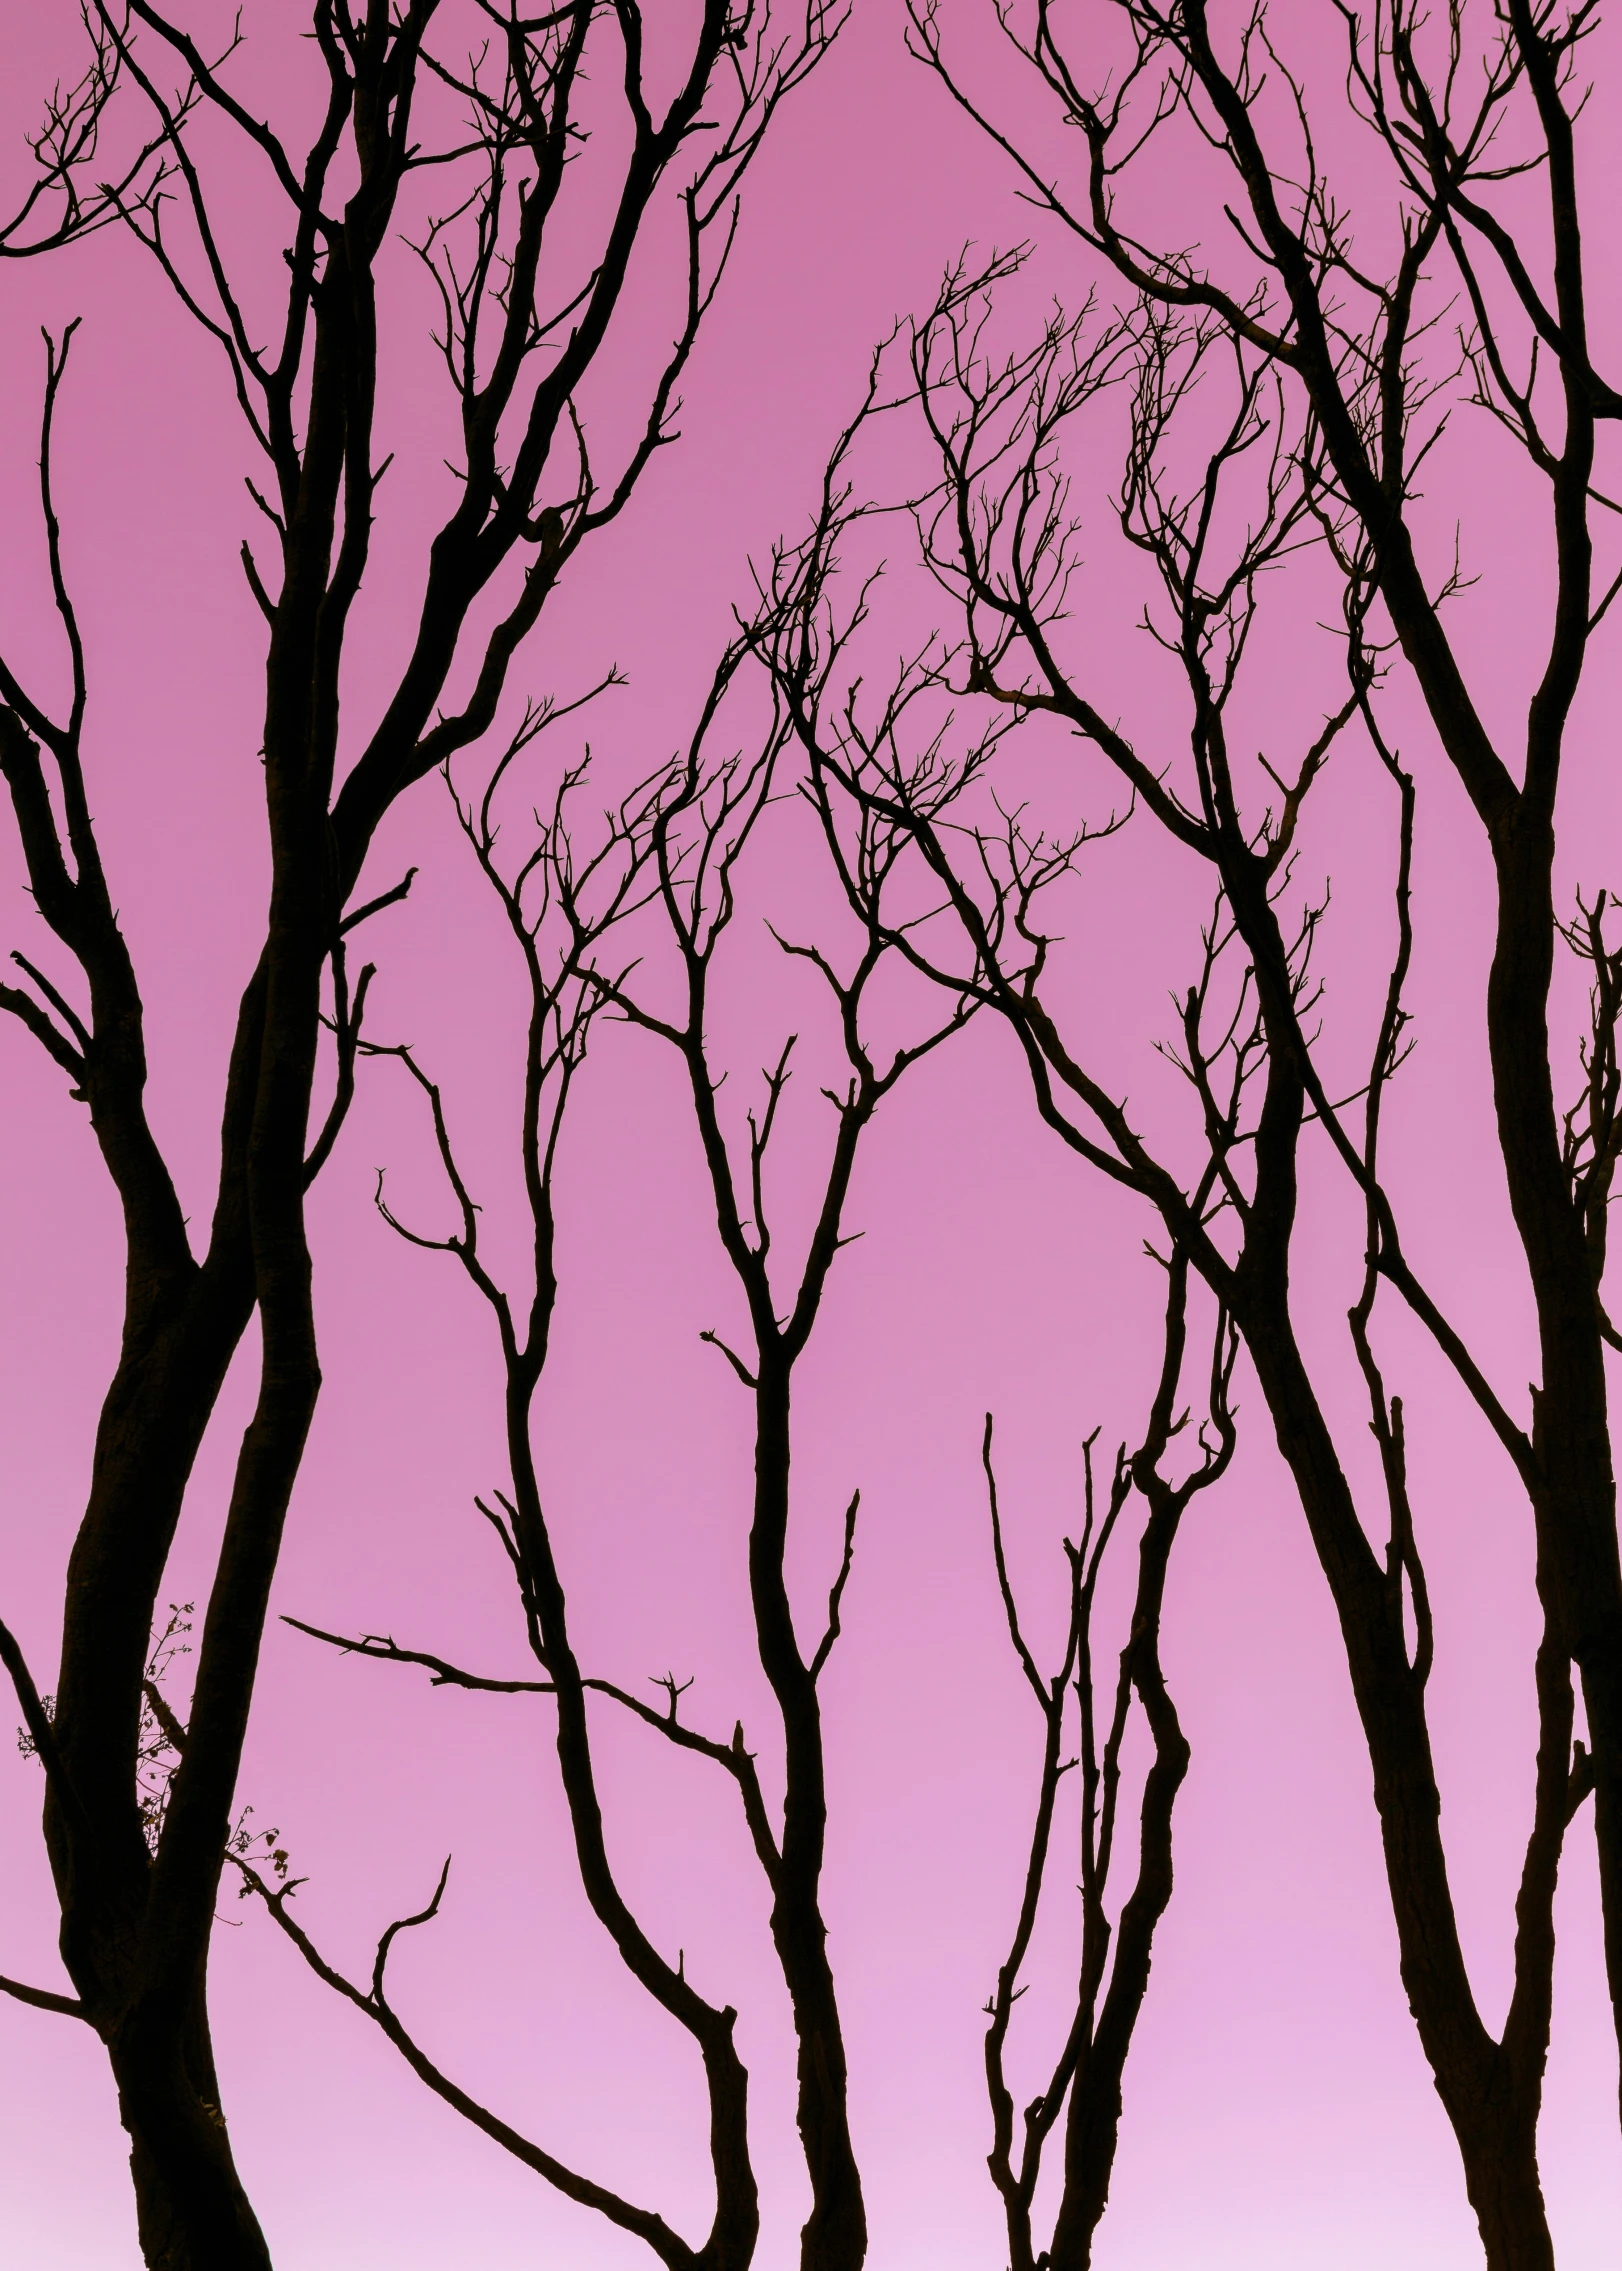 some trees against a purple sky as a lone person walks